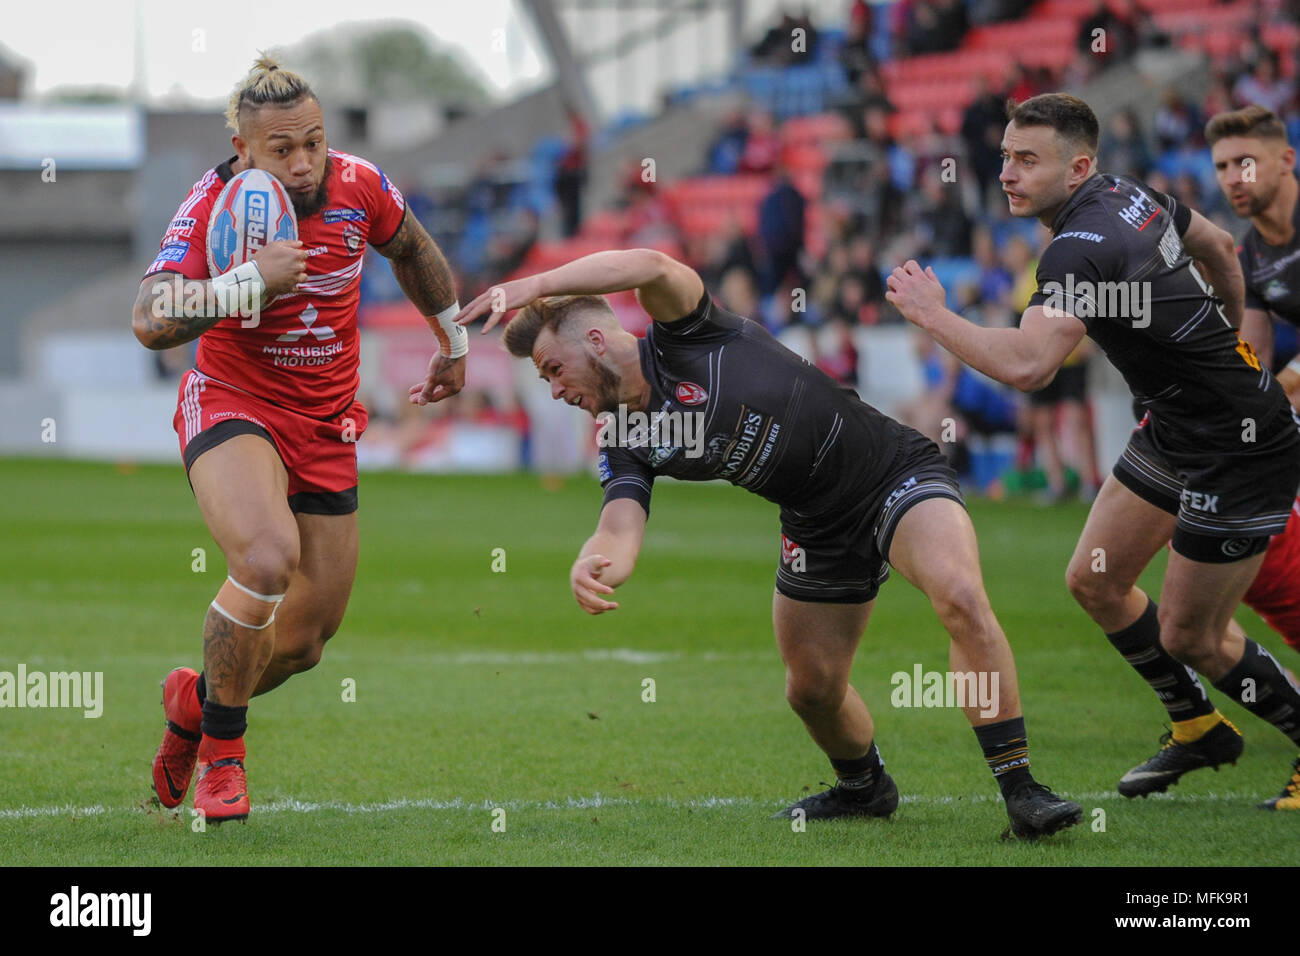 Manchester, UK. 26th April 2018 , AJ Bell Stadium, Manchester, England; Betfred Super League rugby, Round 13, Salford Red Devils v St Helens ; Junior Sa'u of Salford Red Devils breaks through the line Credit: News Images /Alamy Live News Stock Photo